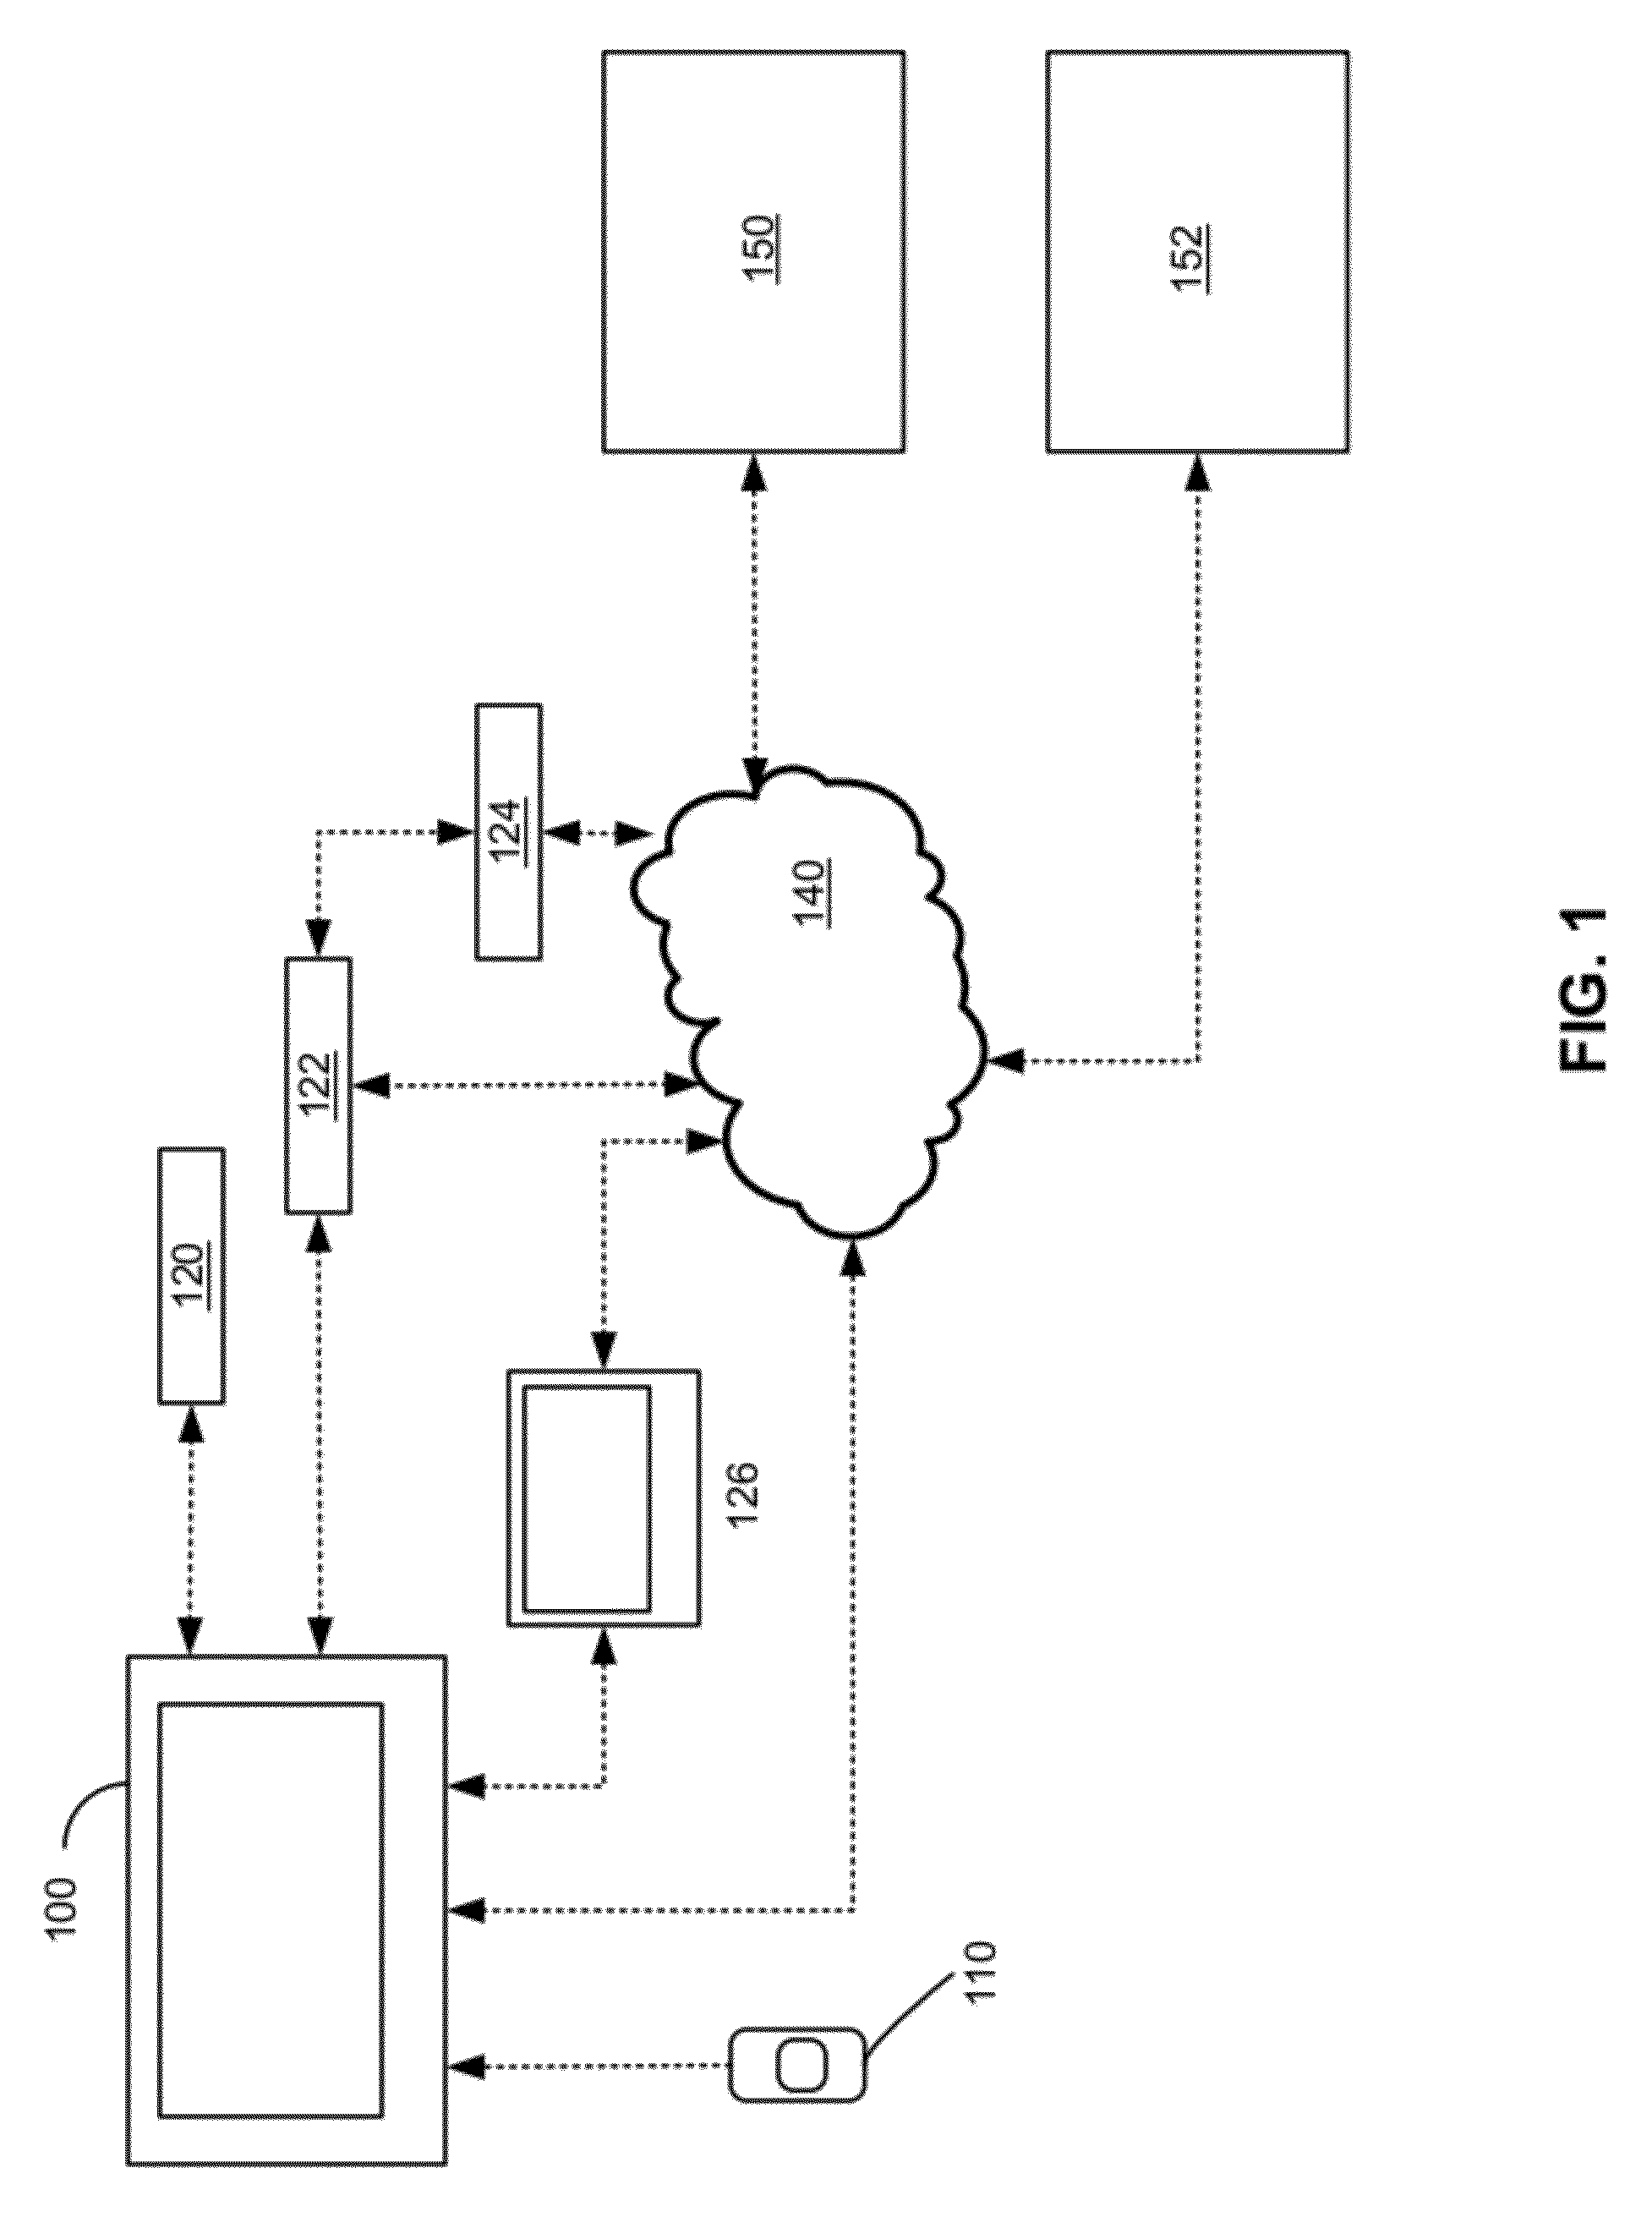 Remote control system for connected devices